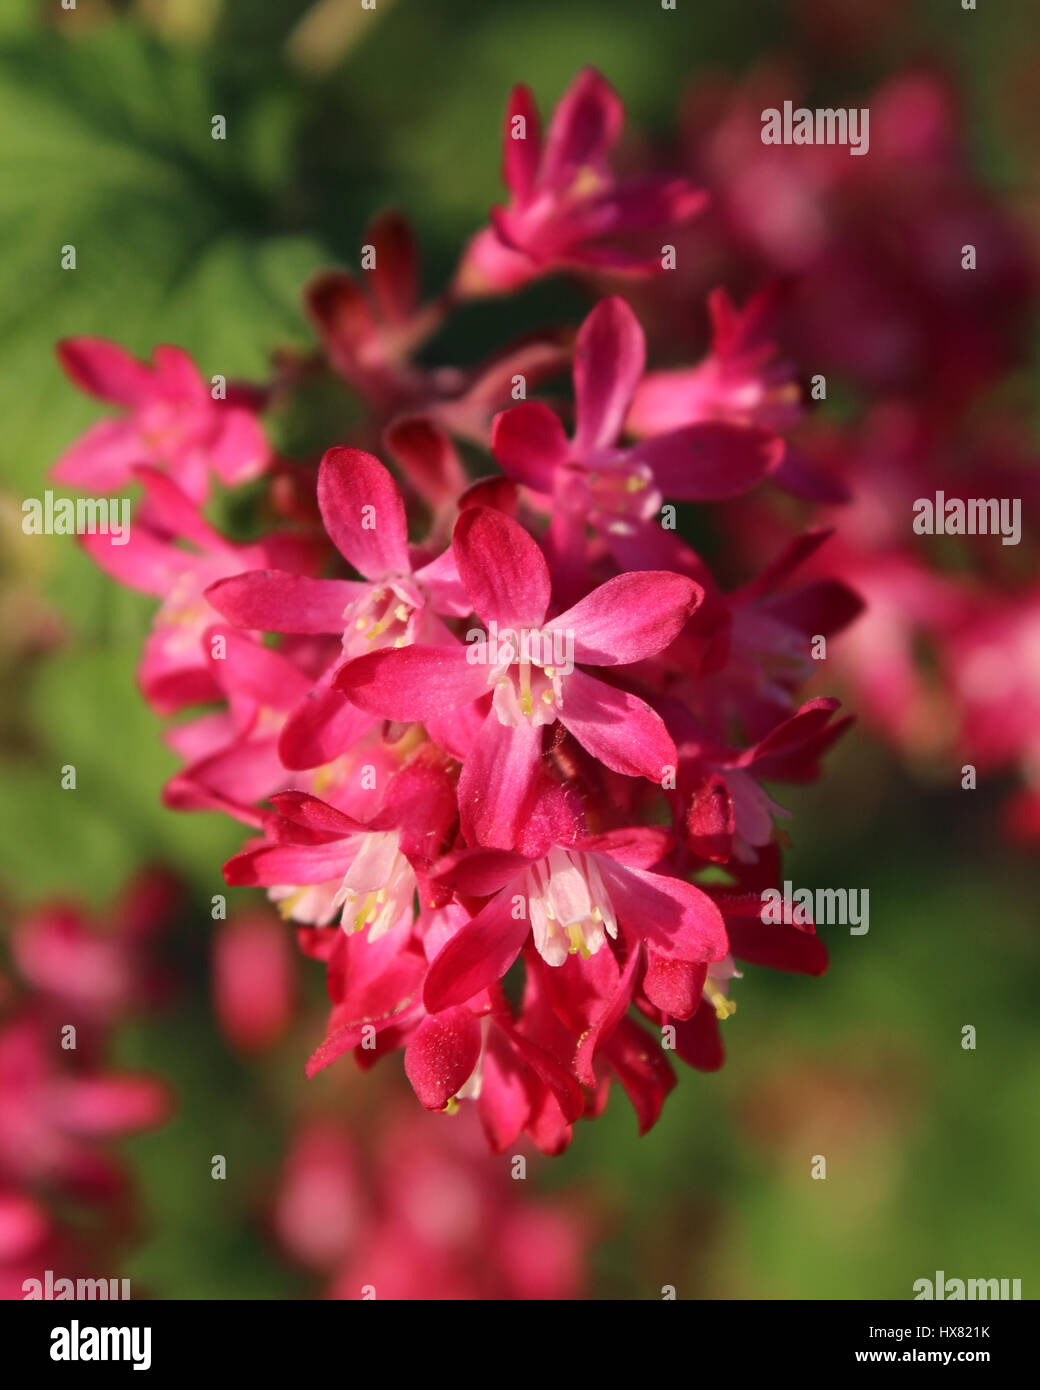 Close up of the early spring flowers of Ribes sanguineum also known as Flowering Currant or Red Flower Currant. Stock Photo